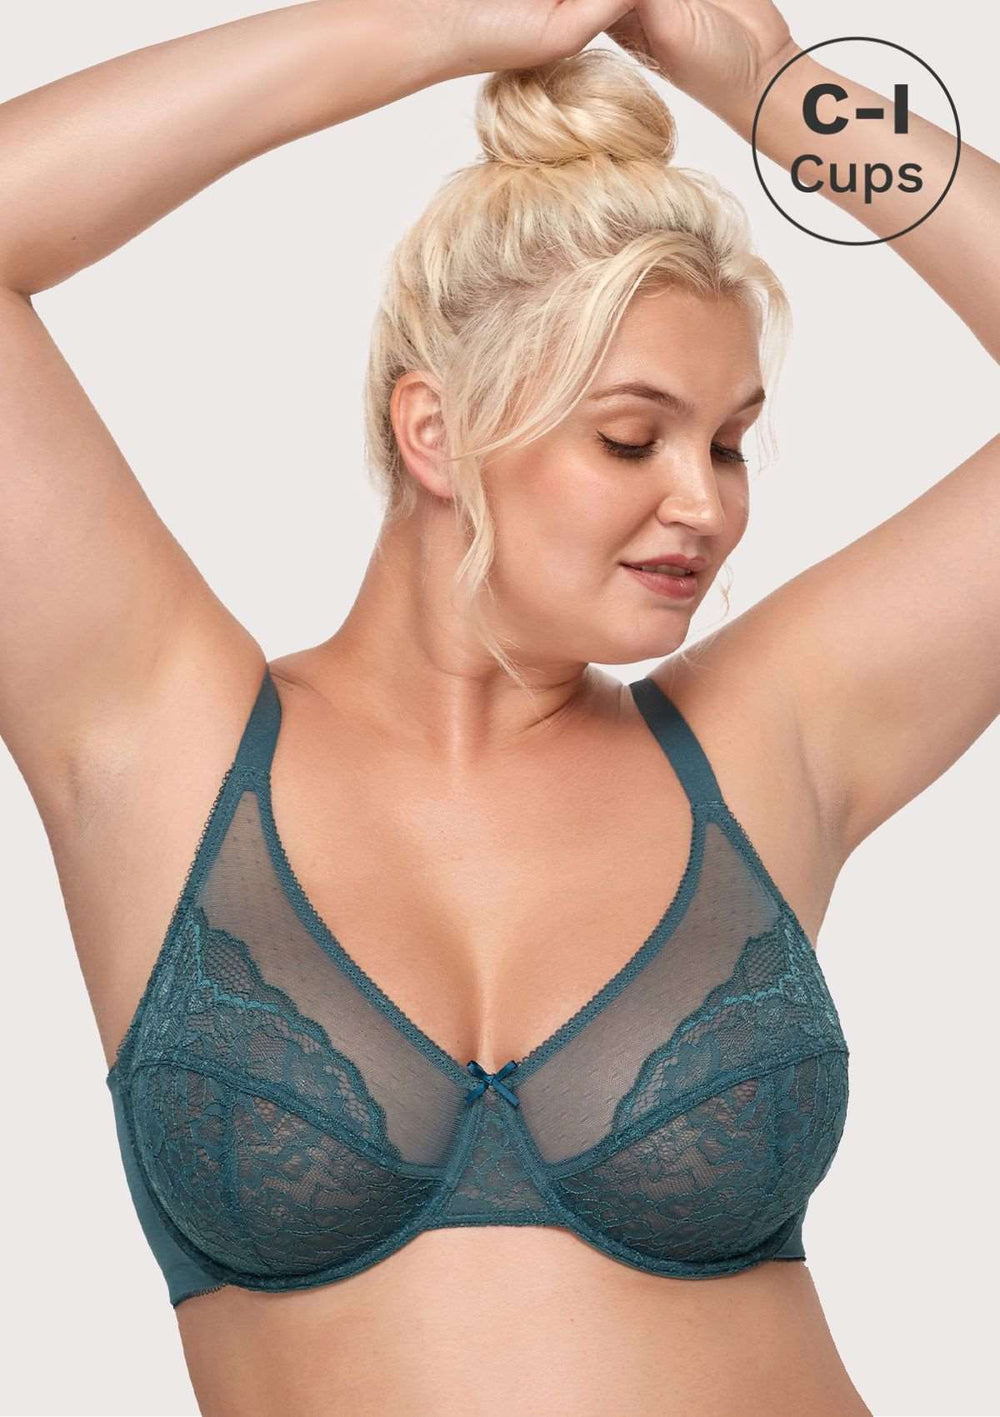 HSIA Enchante Full Coverage Bra: Supportive Bra for Big Busts